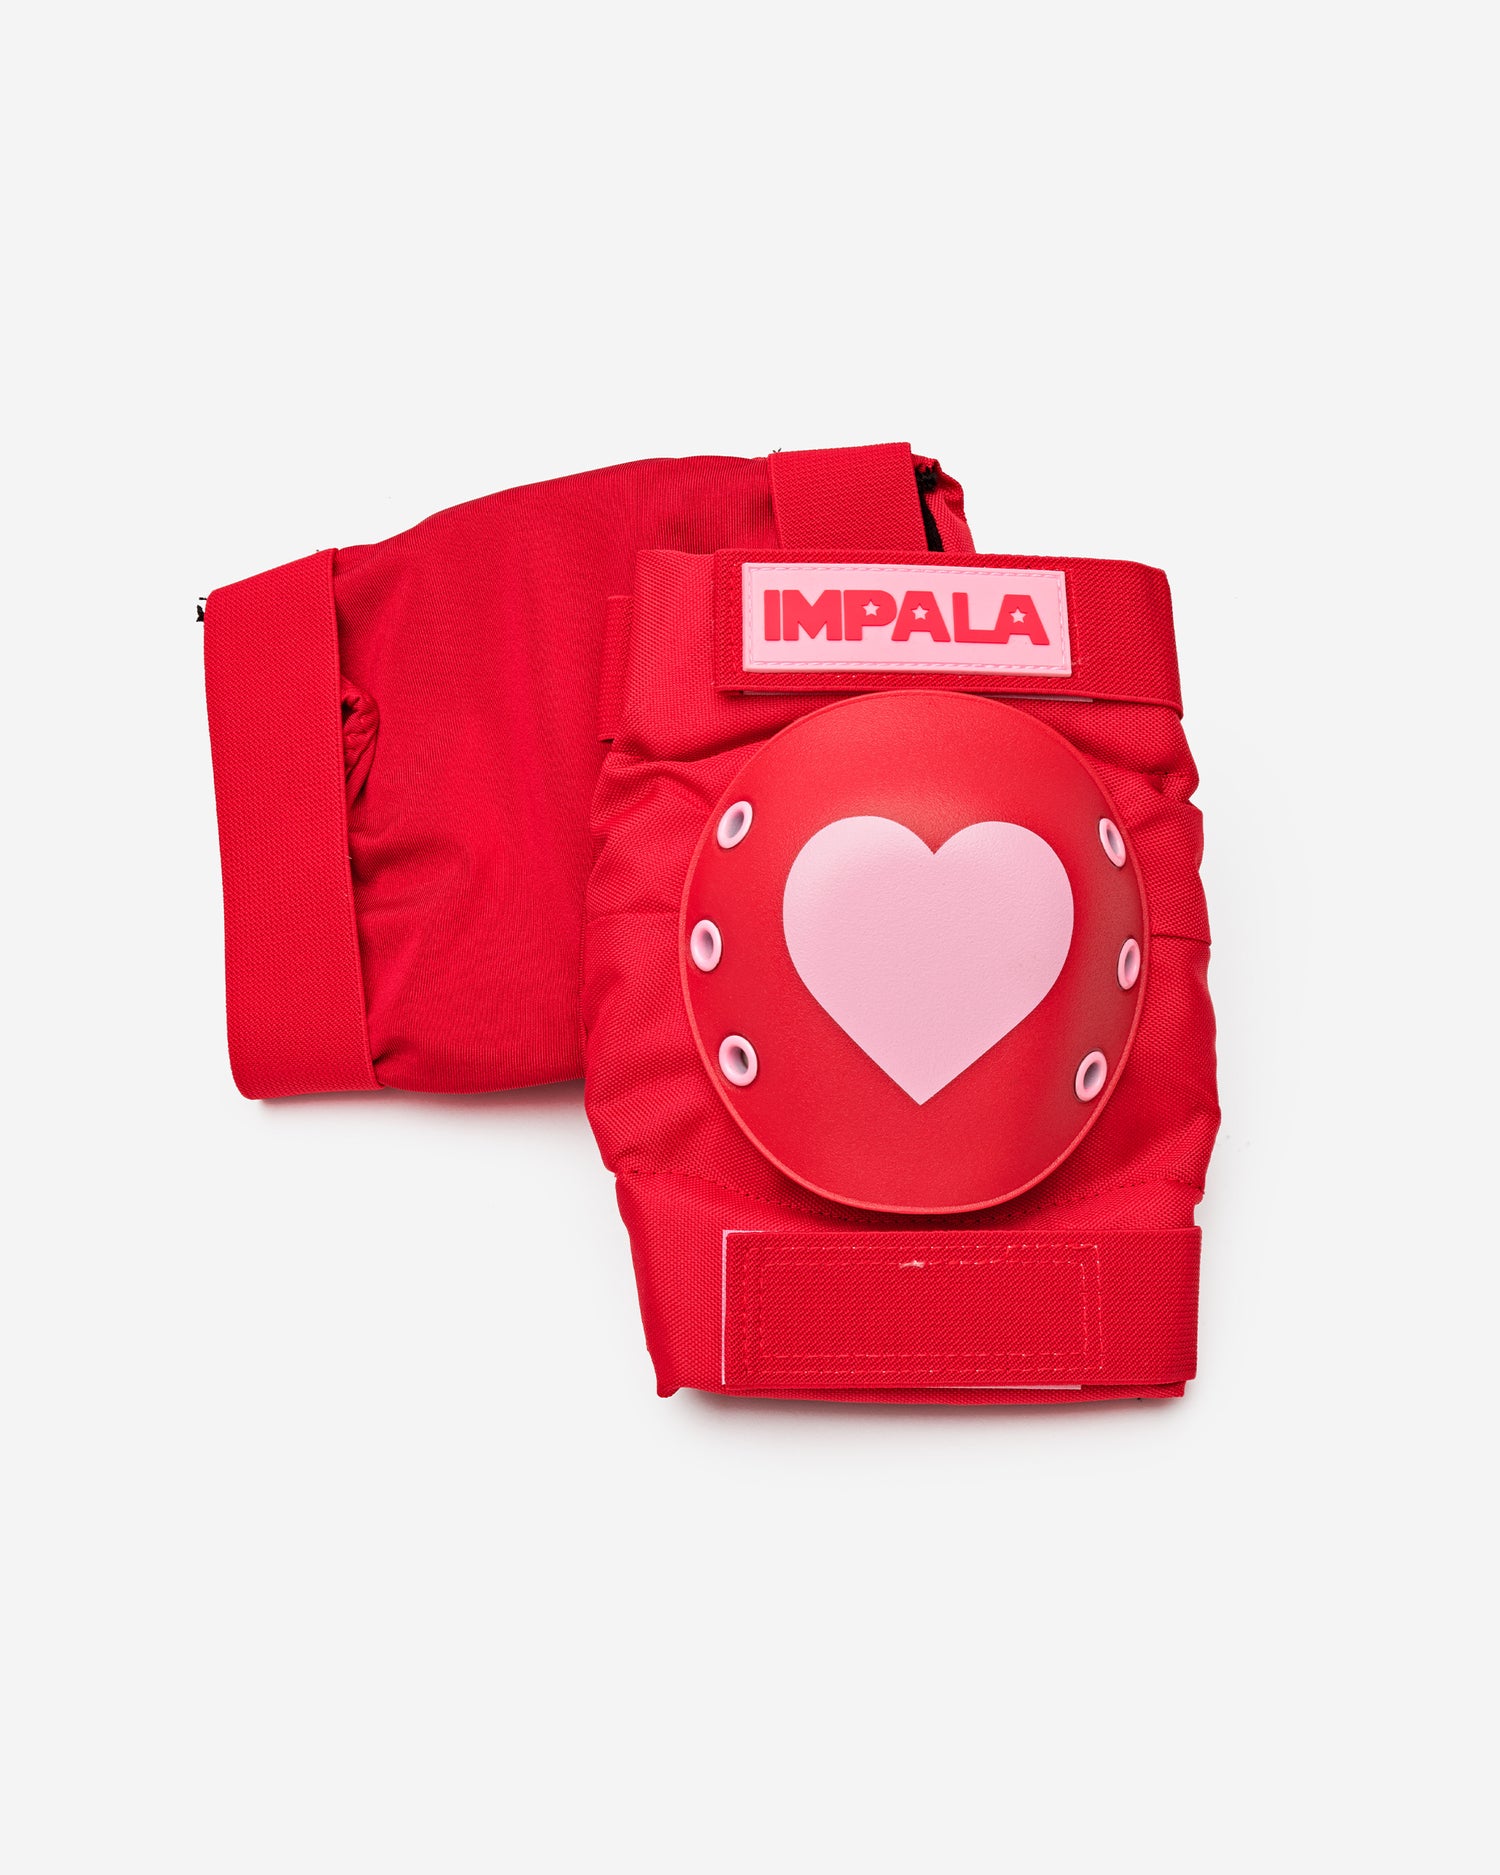 Elbow pads from Impala Protective Set - Red Hearts